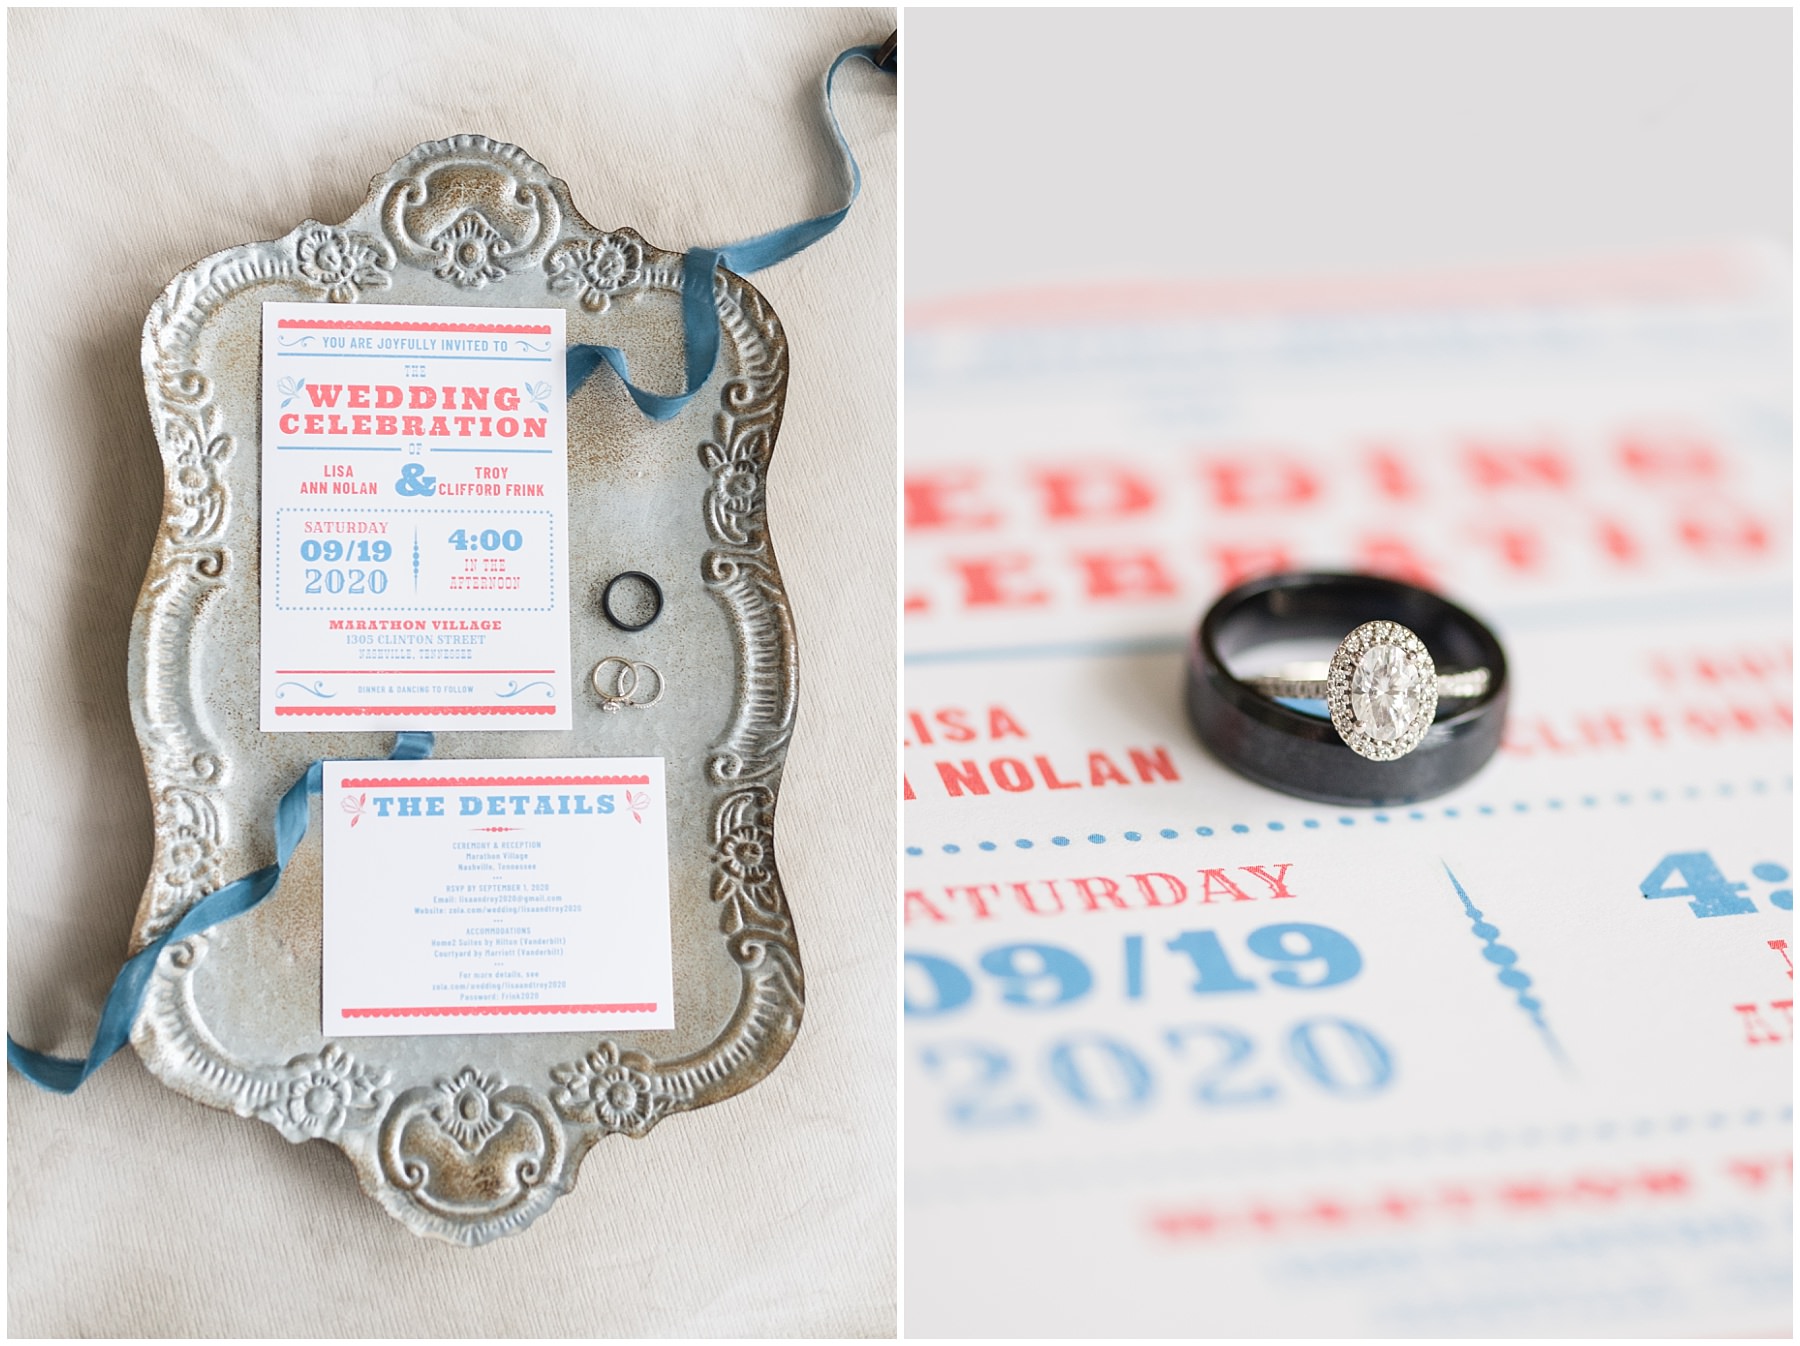 Nashville wedding detail photos of the invitations and rings.